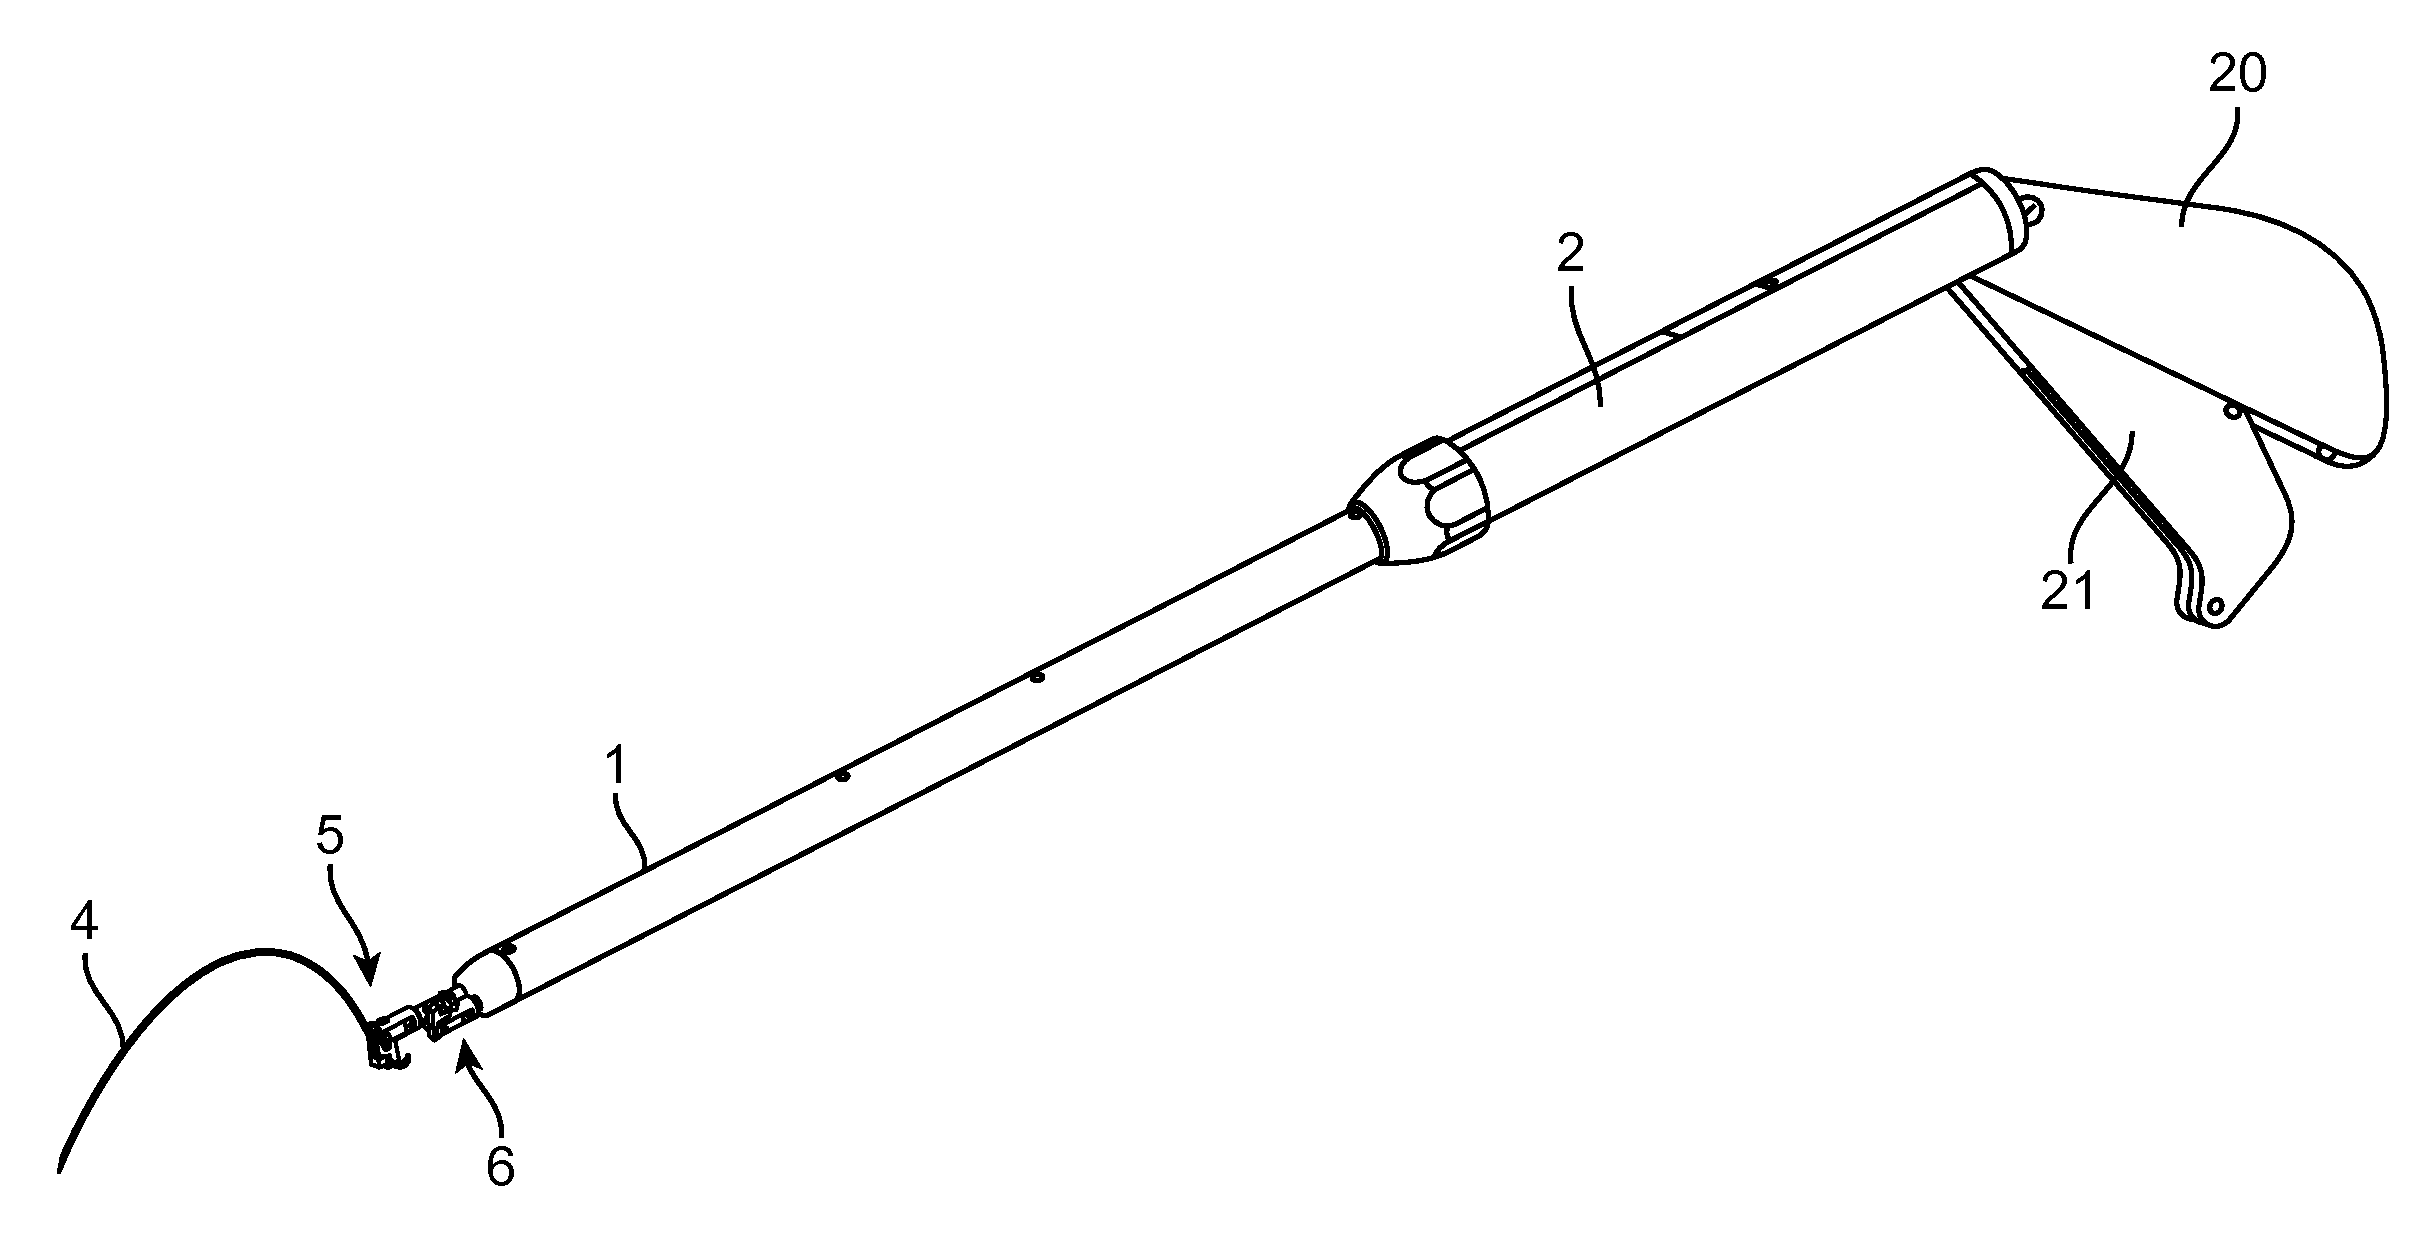 Endoscopic Suturing Device, System and Method